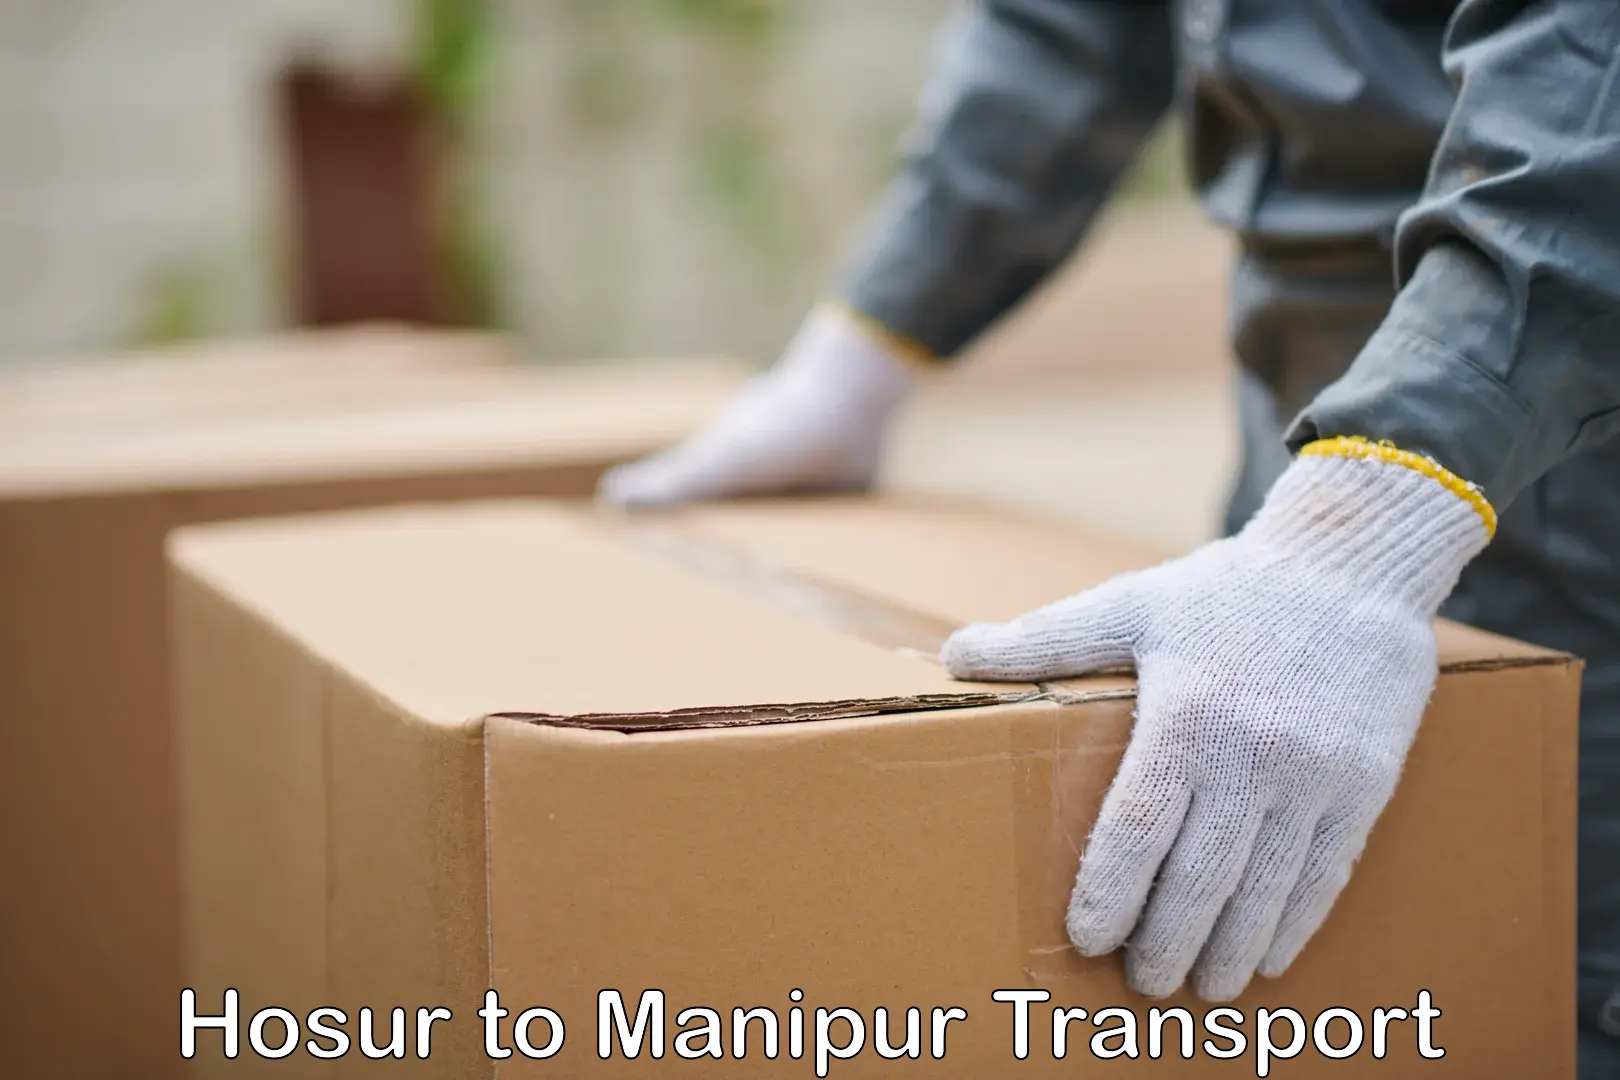 Container transport service Hosur to Manipur